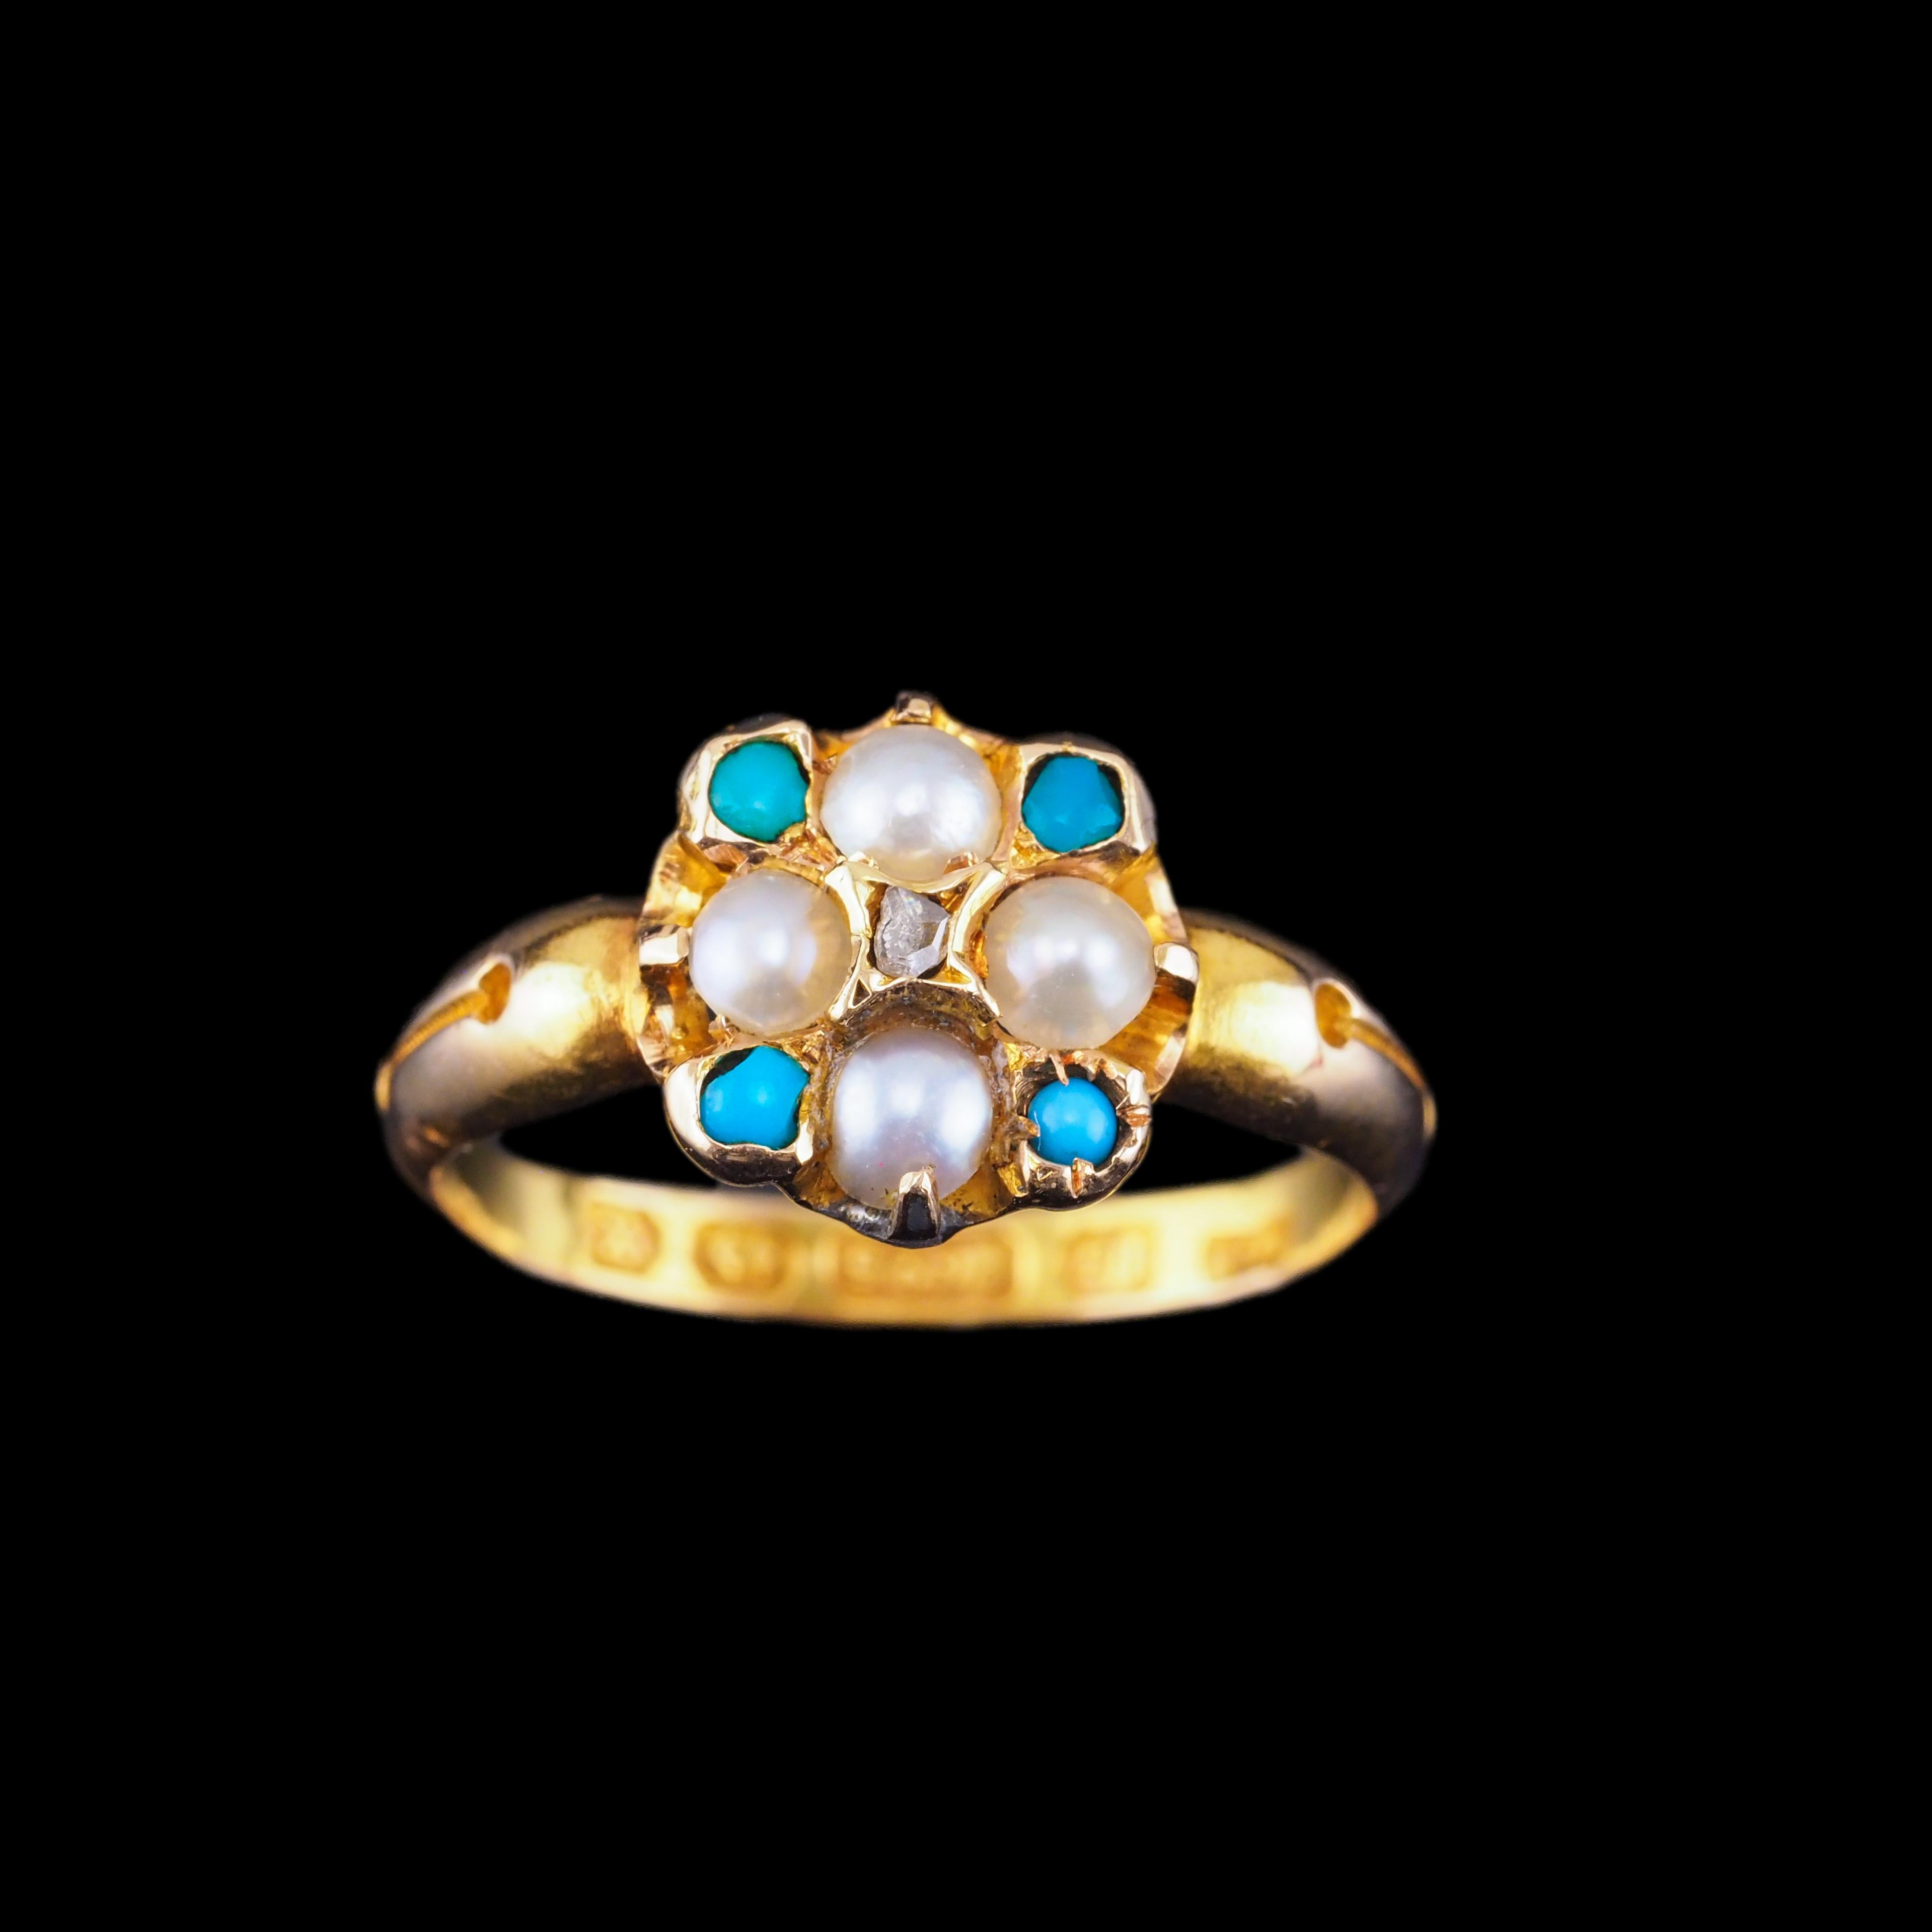 Antique Turquoise, Diamond & Pearl Ring 15K Gold Victorian Flower Cluster 1897 For Sale 7